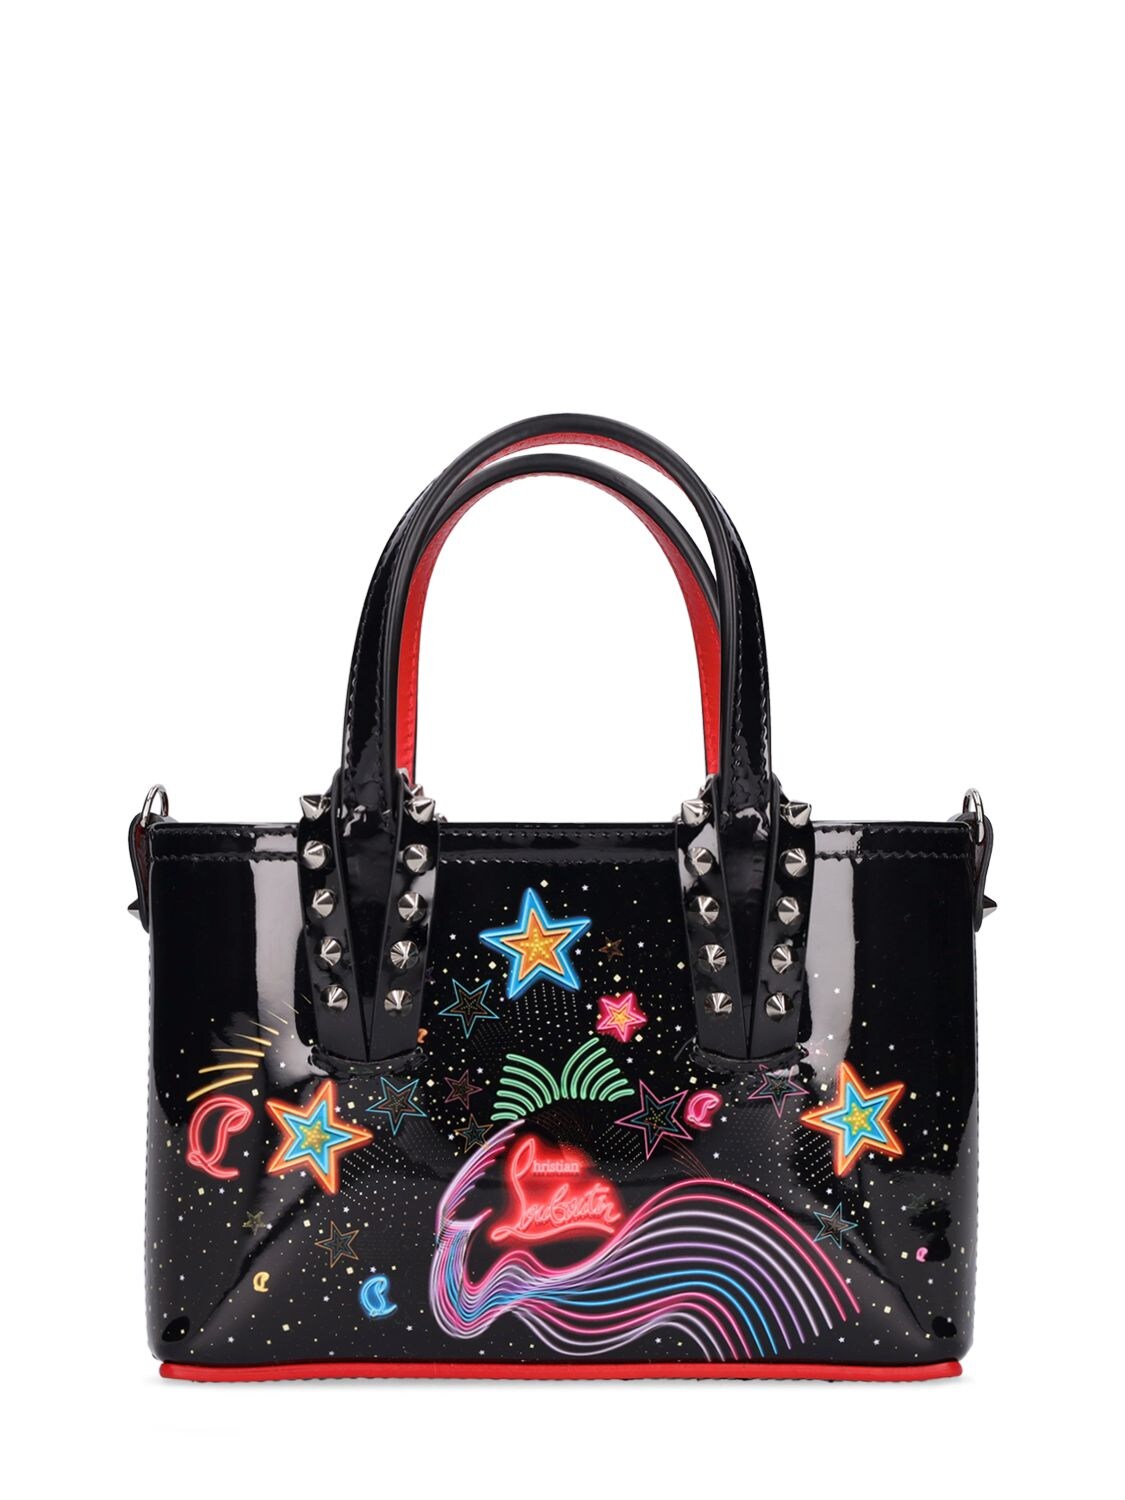 Christian Louboutin Nano Cabata Starlight East/west Patent Leather Tote ...